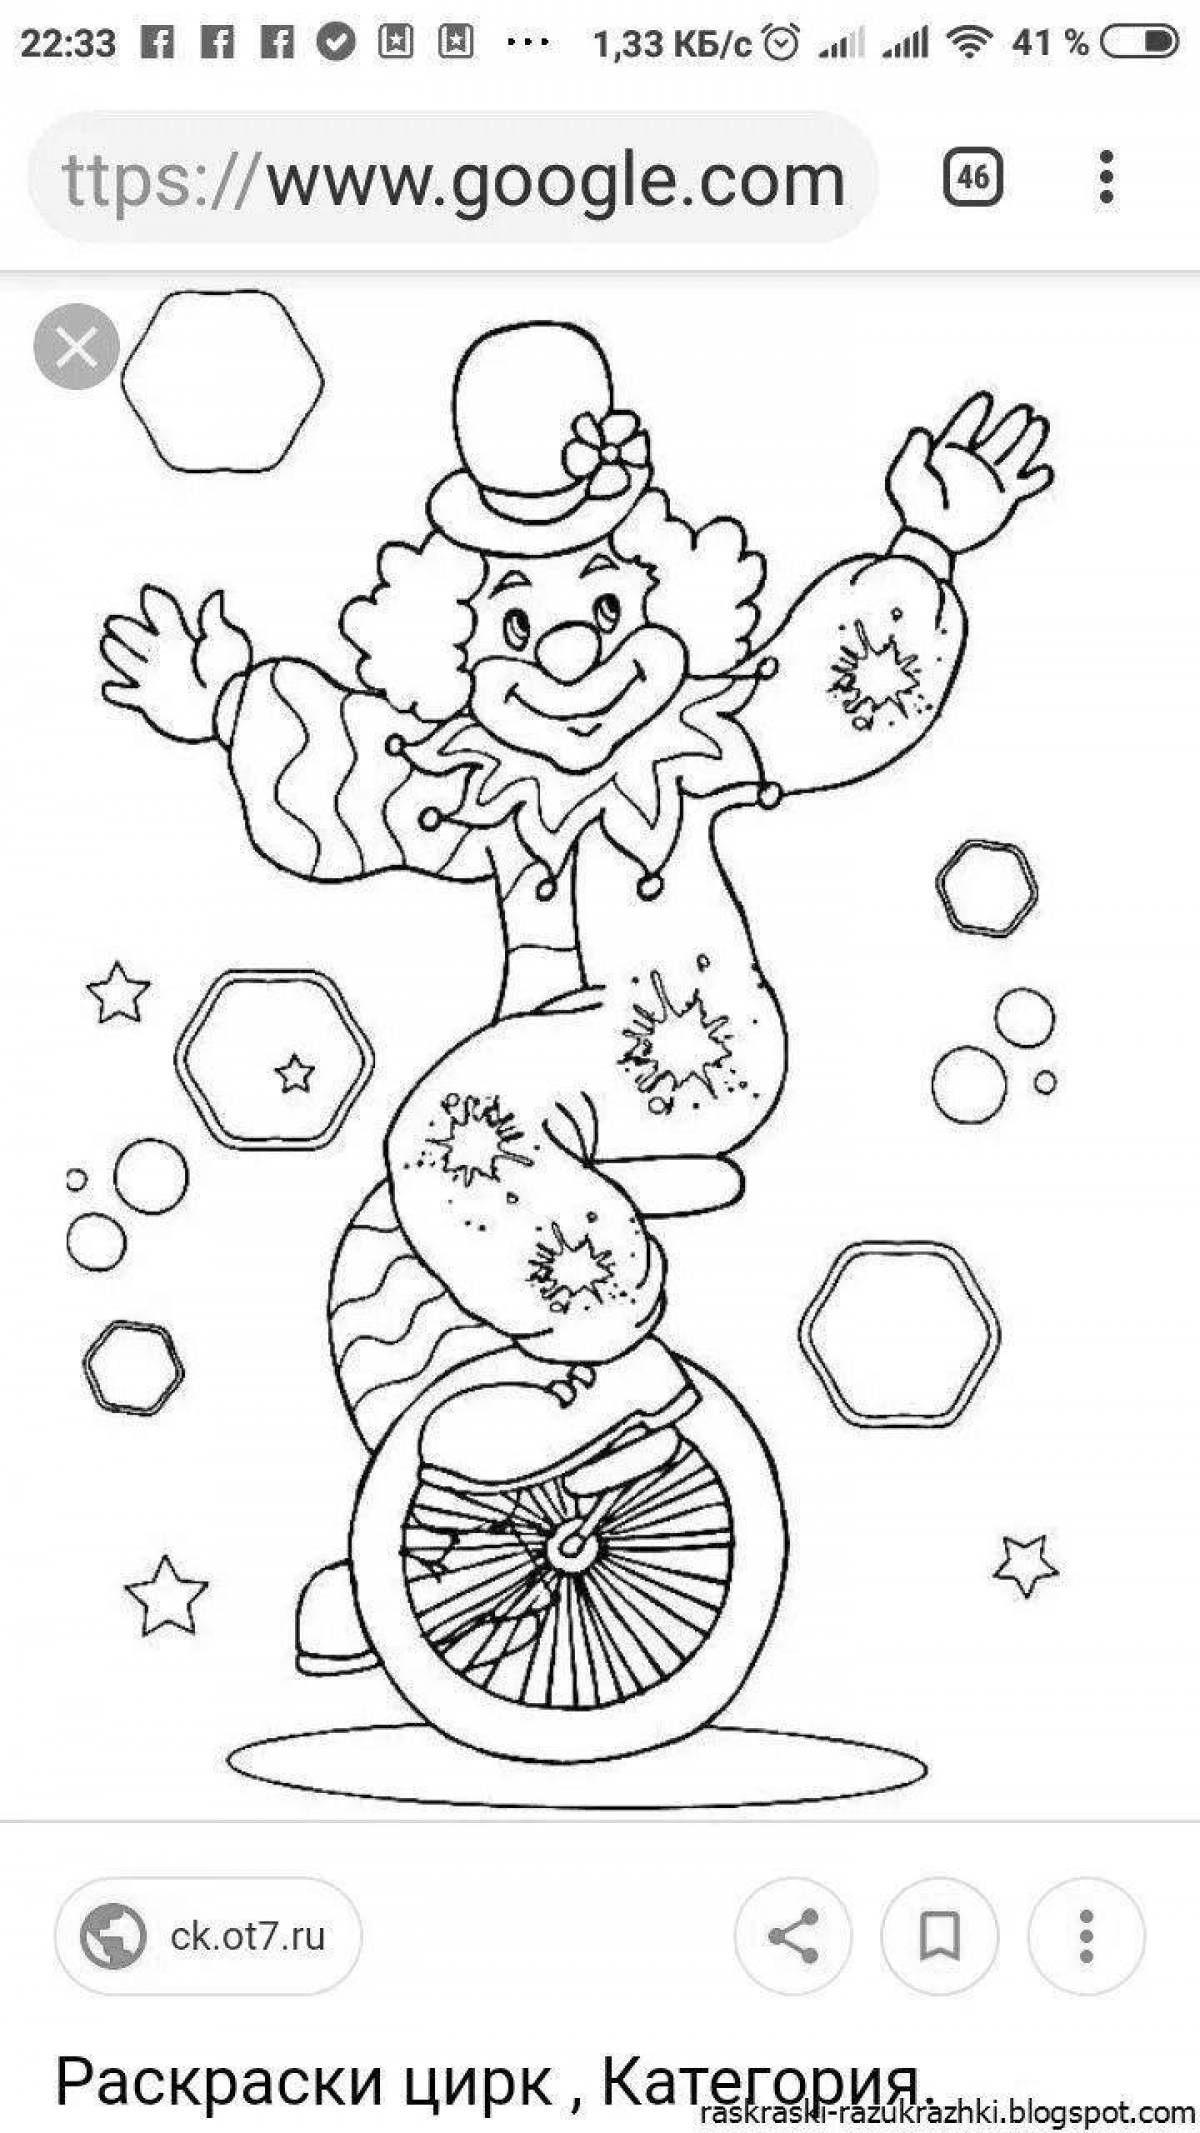 Fun circus coloring book for 7-8 year olds